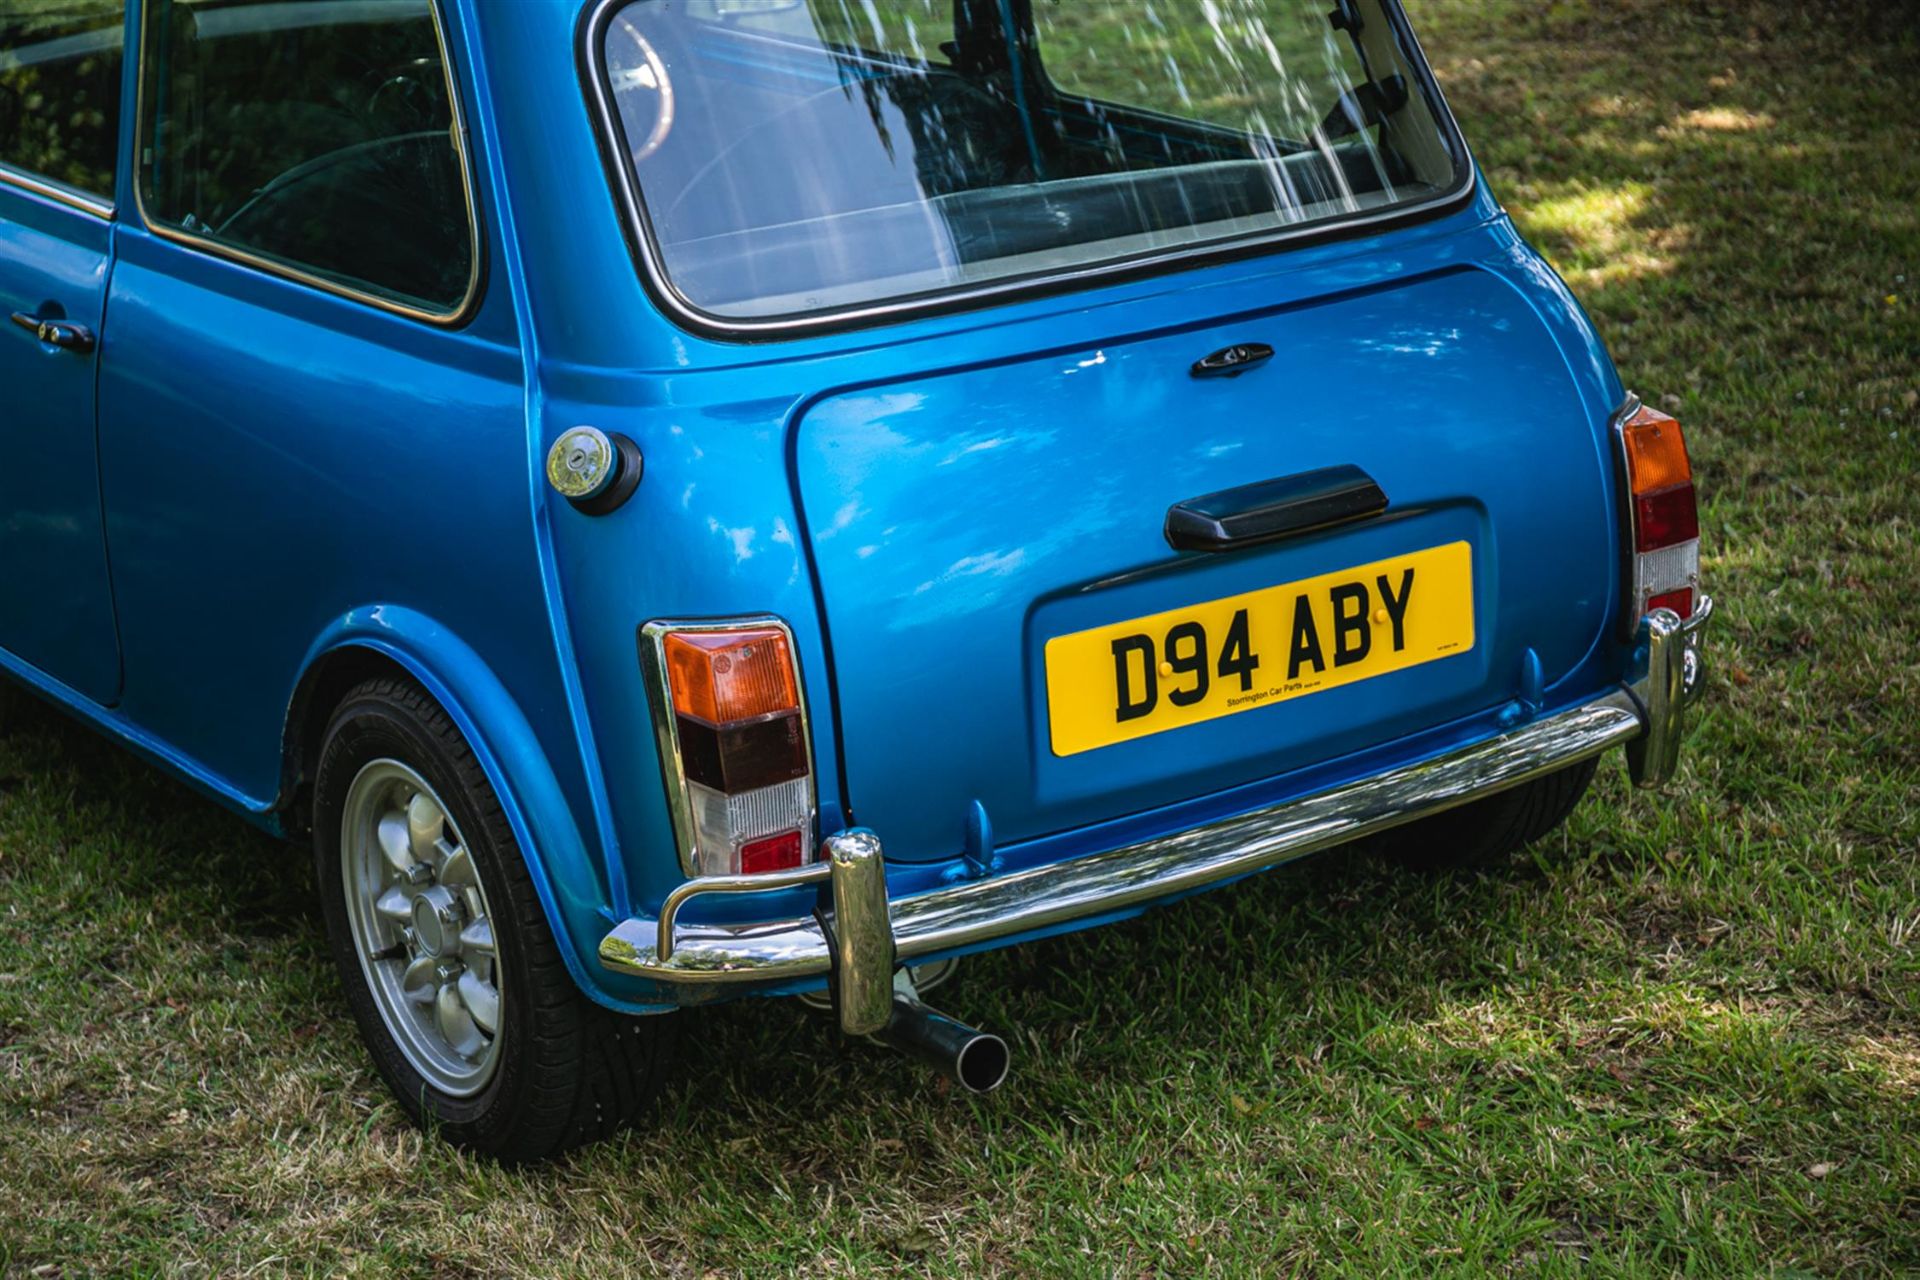 1986 Austin Mini Mayfair - 1275 Special - Image 9 of 10